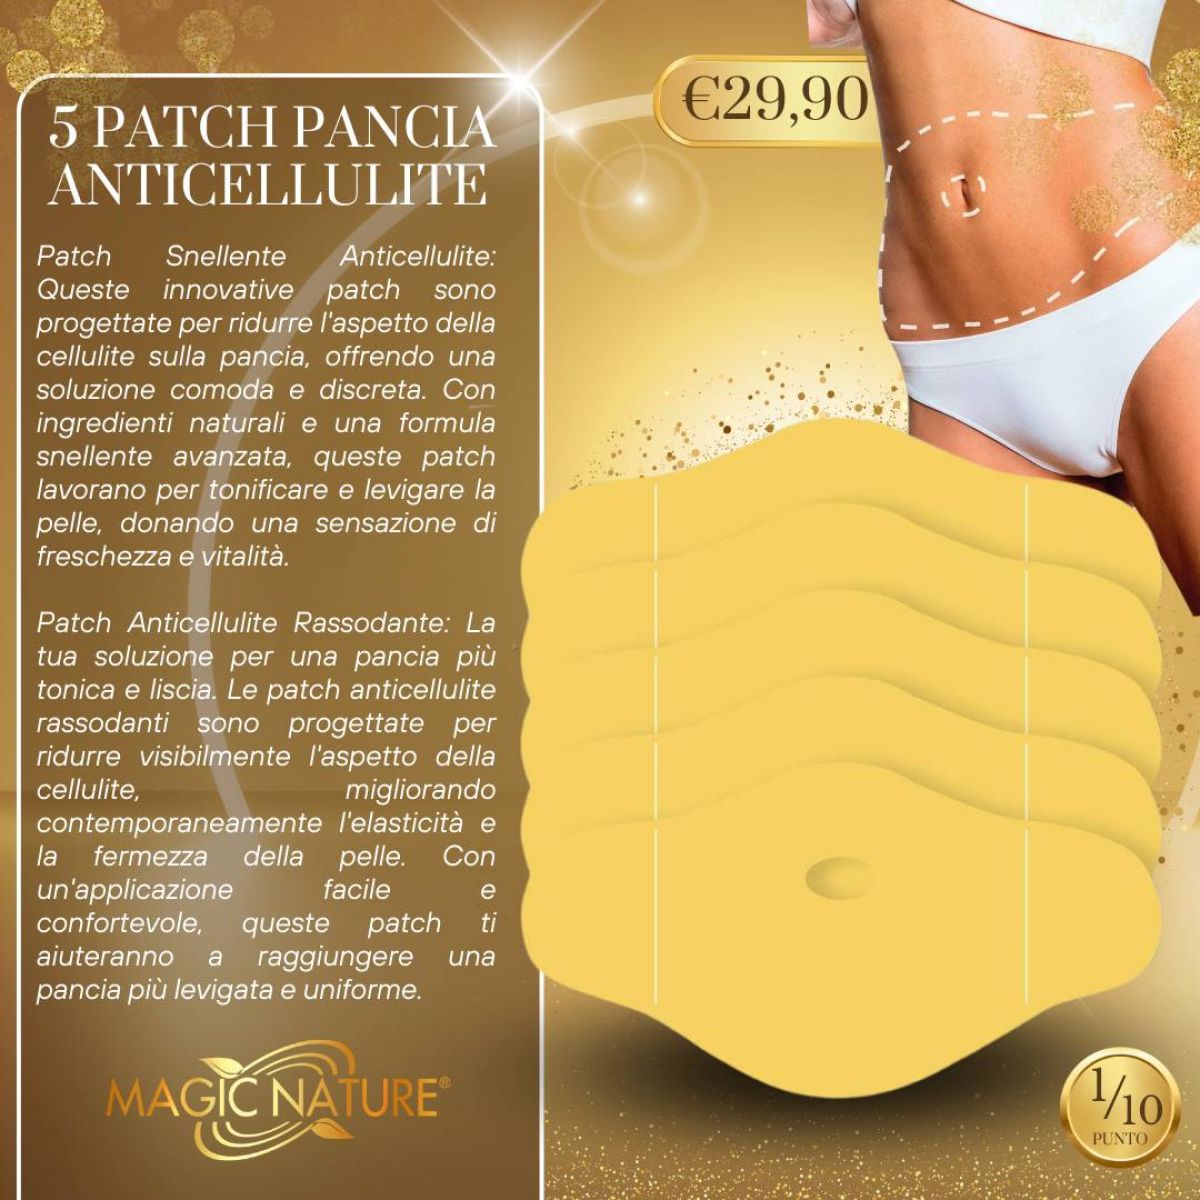 5 PATCH PANCIA ANTICELLULITE